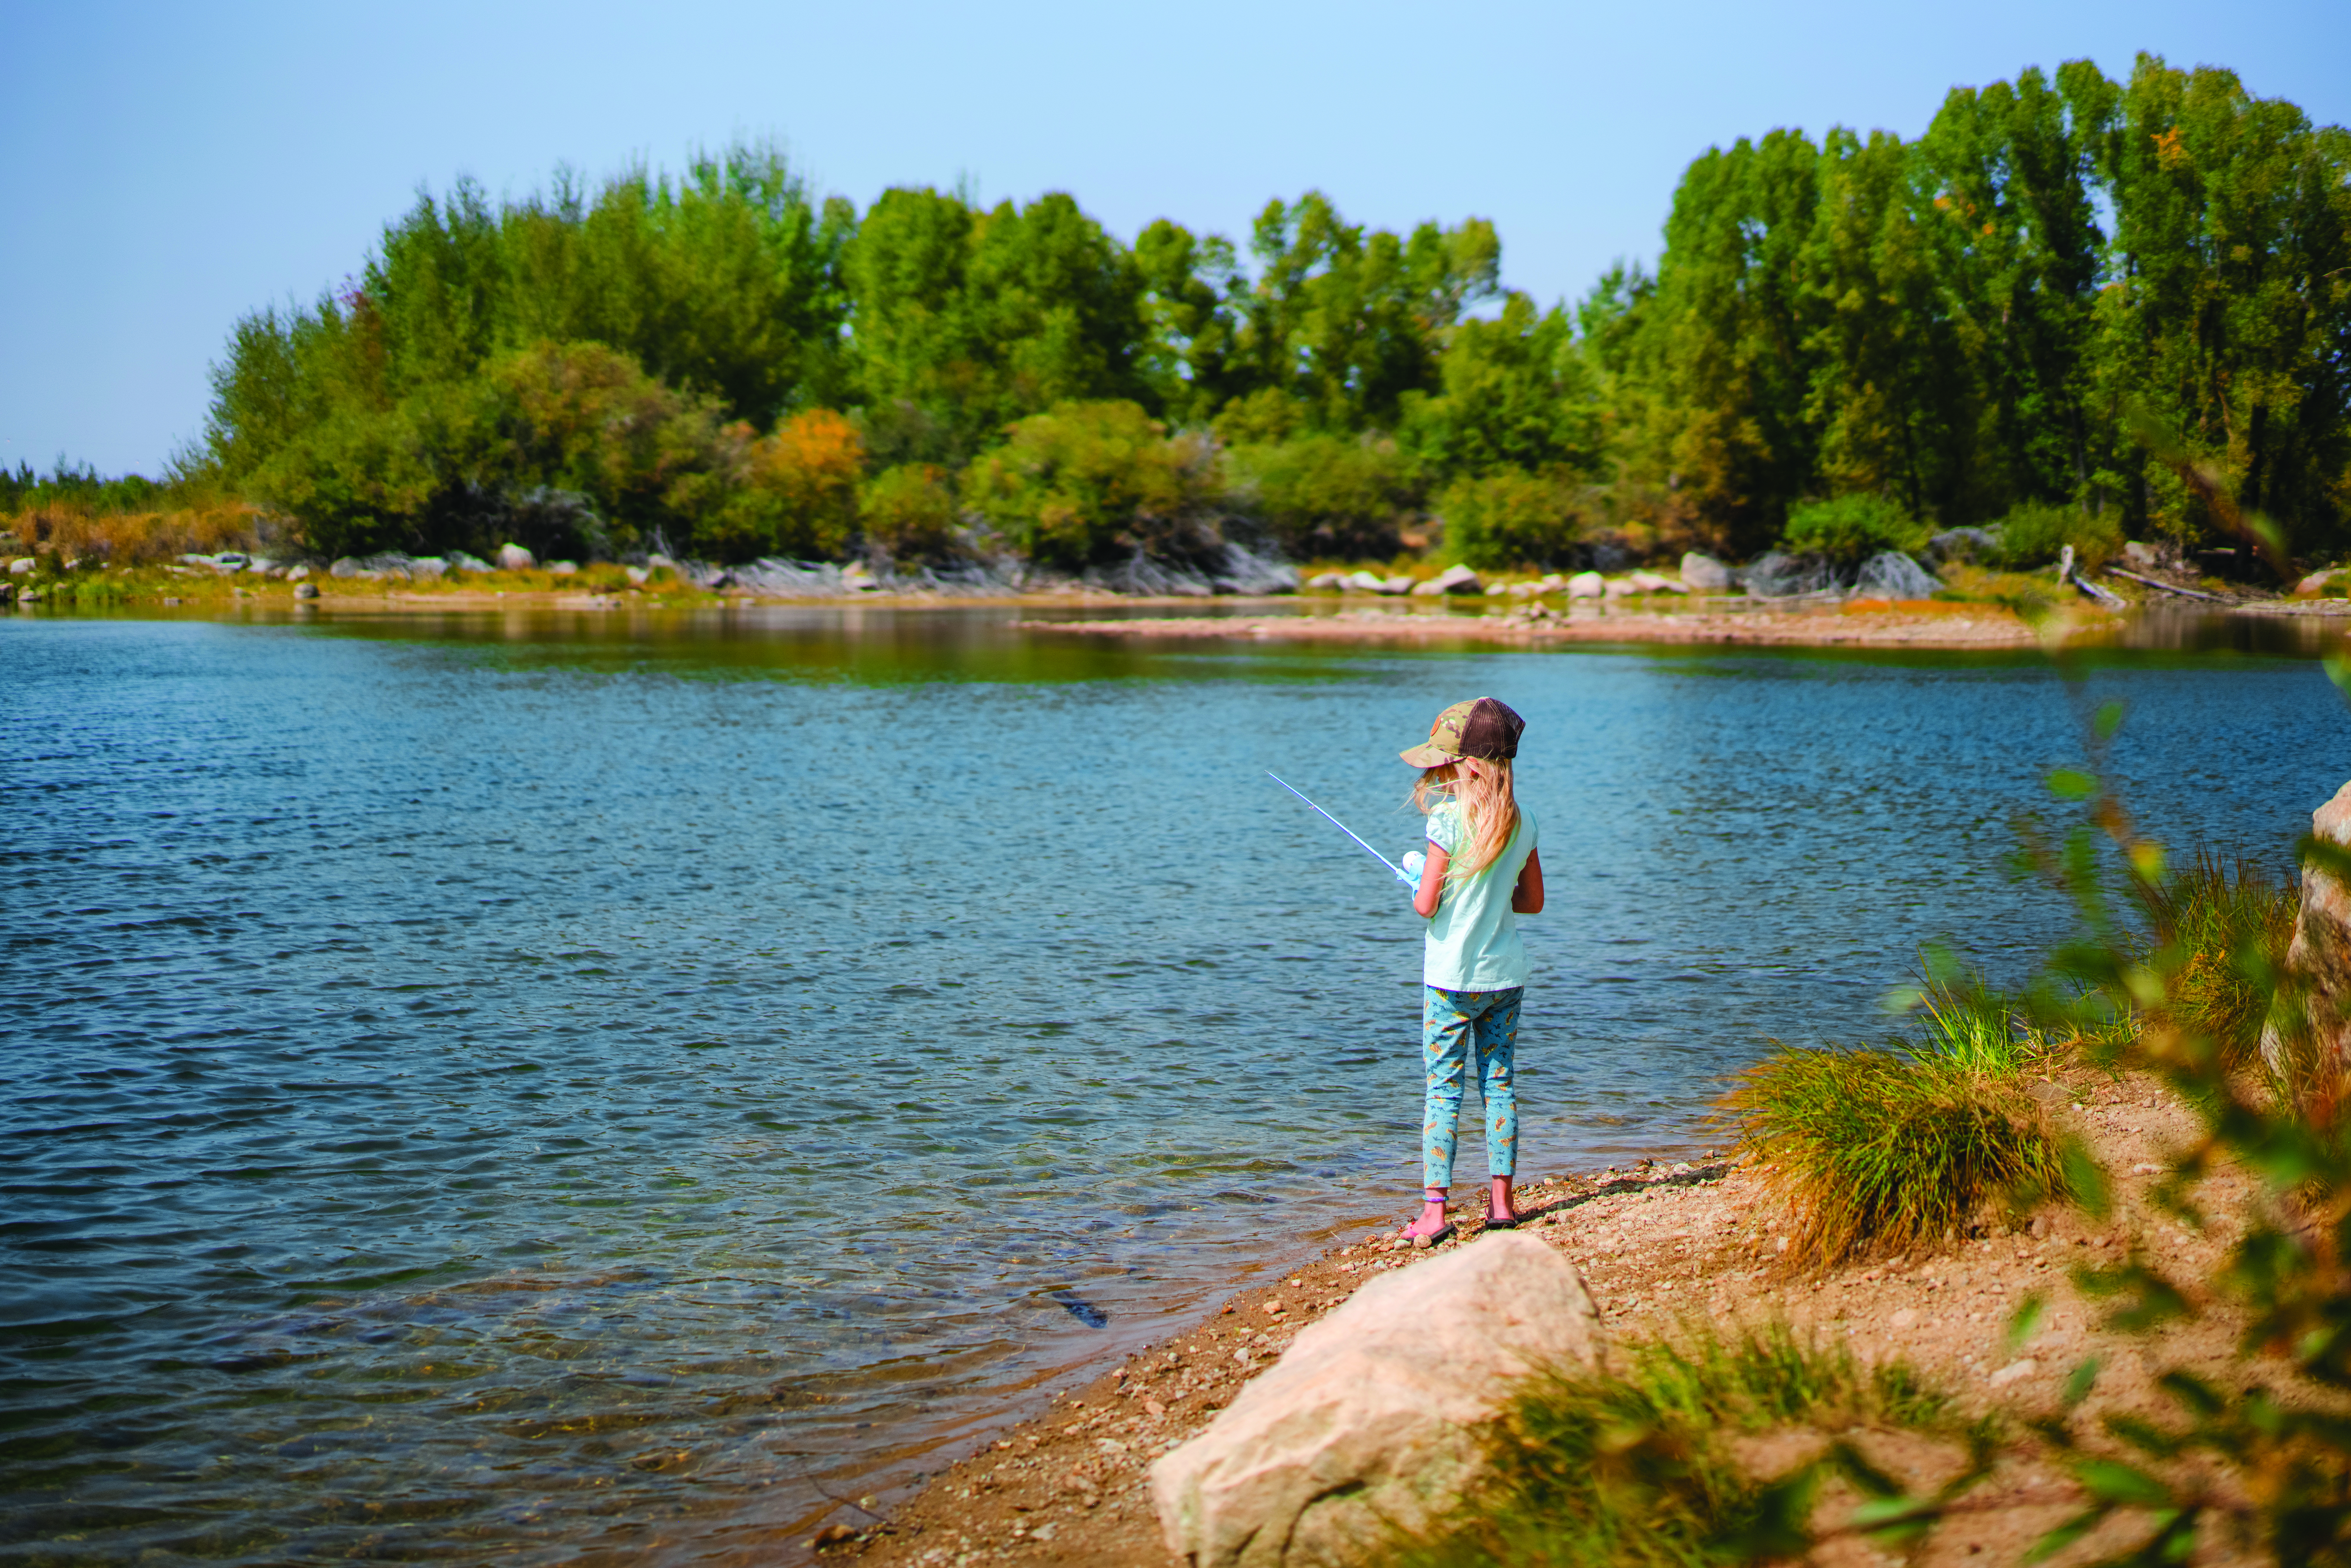 A young angler fishes the blue water of CCC Ponds near Pinedale, Wyoming from the shoreline.